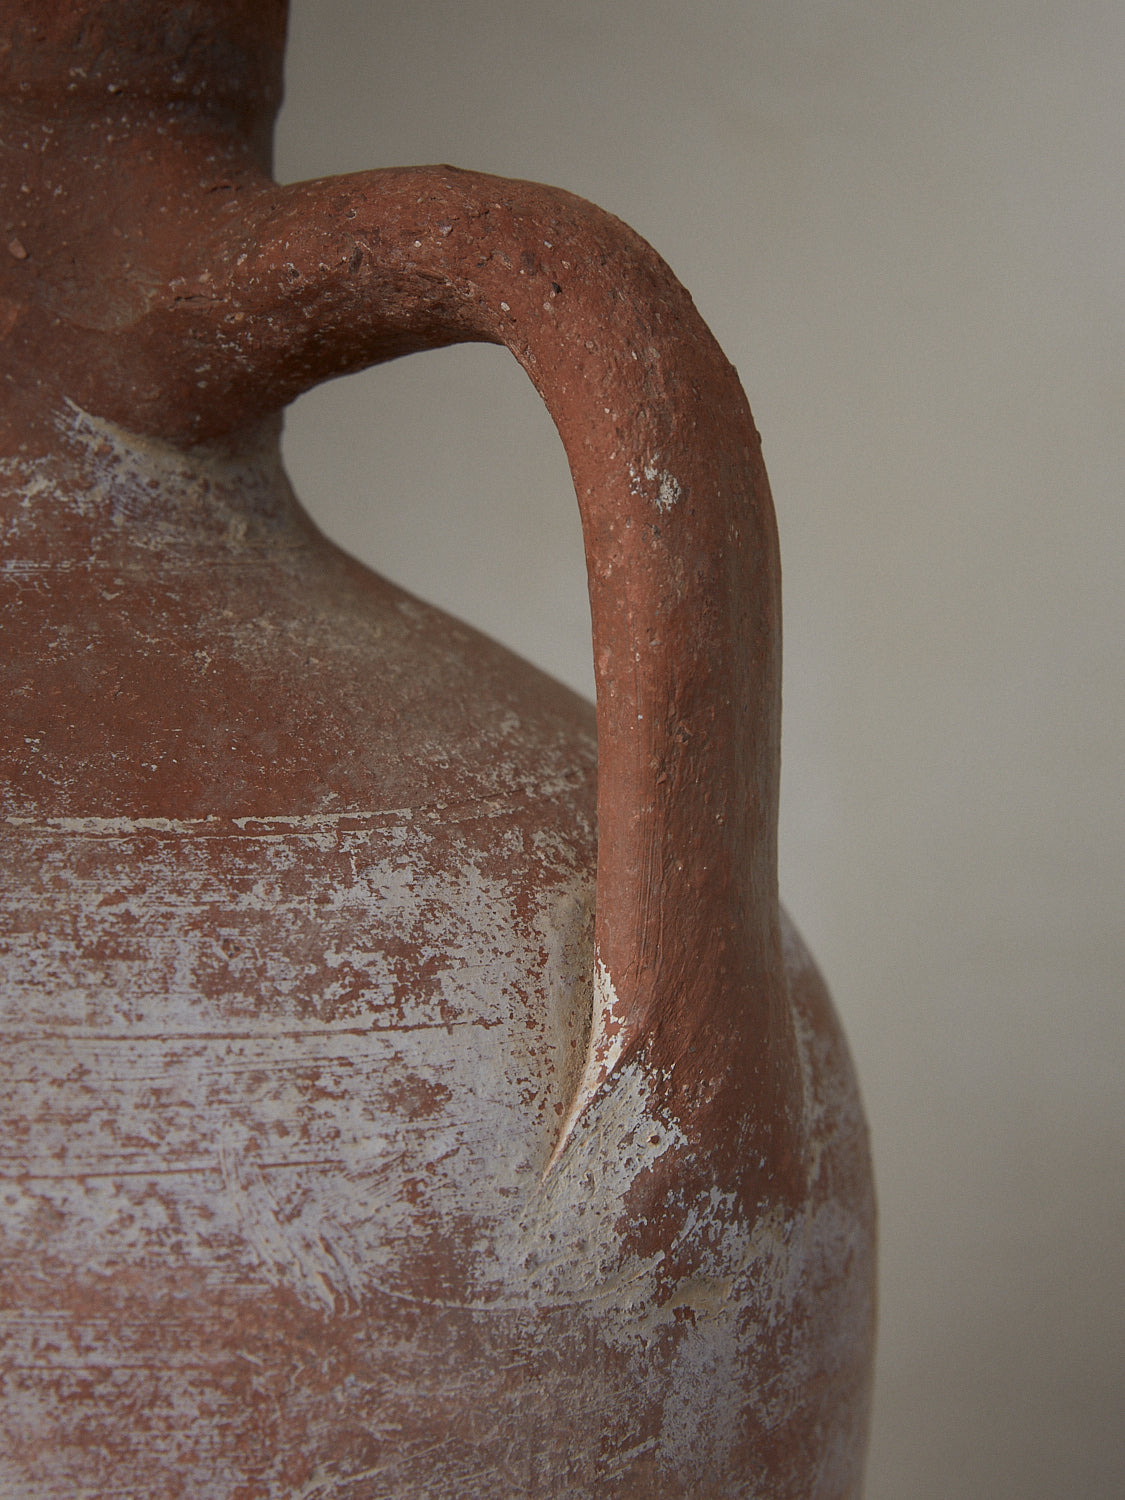 Charles Vessel. Rare vintage find. Ethereal antique Anatolian earthenware pitcher from the 1930's with classical bodice, handle and tapering at footing in aged terracotta.